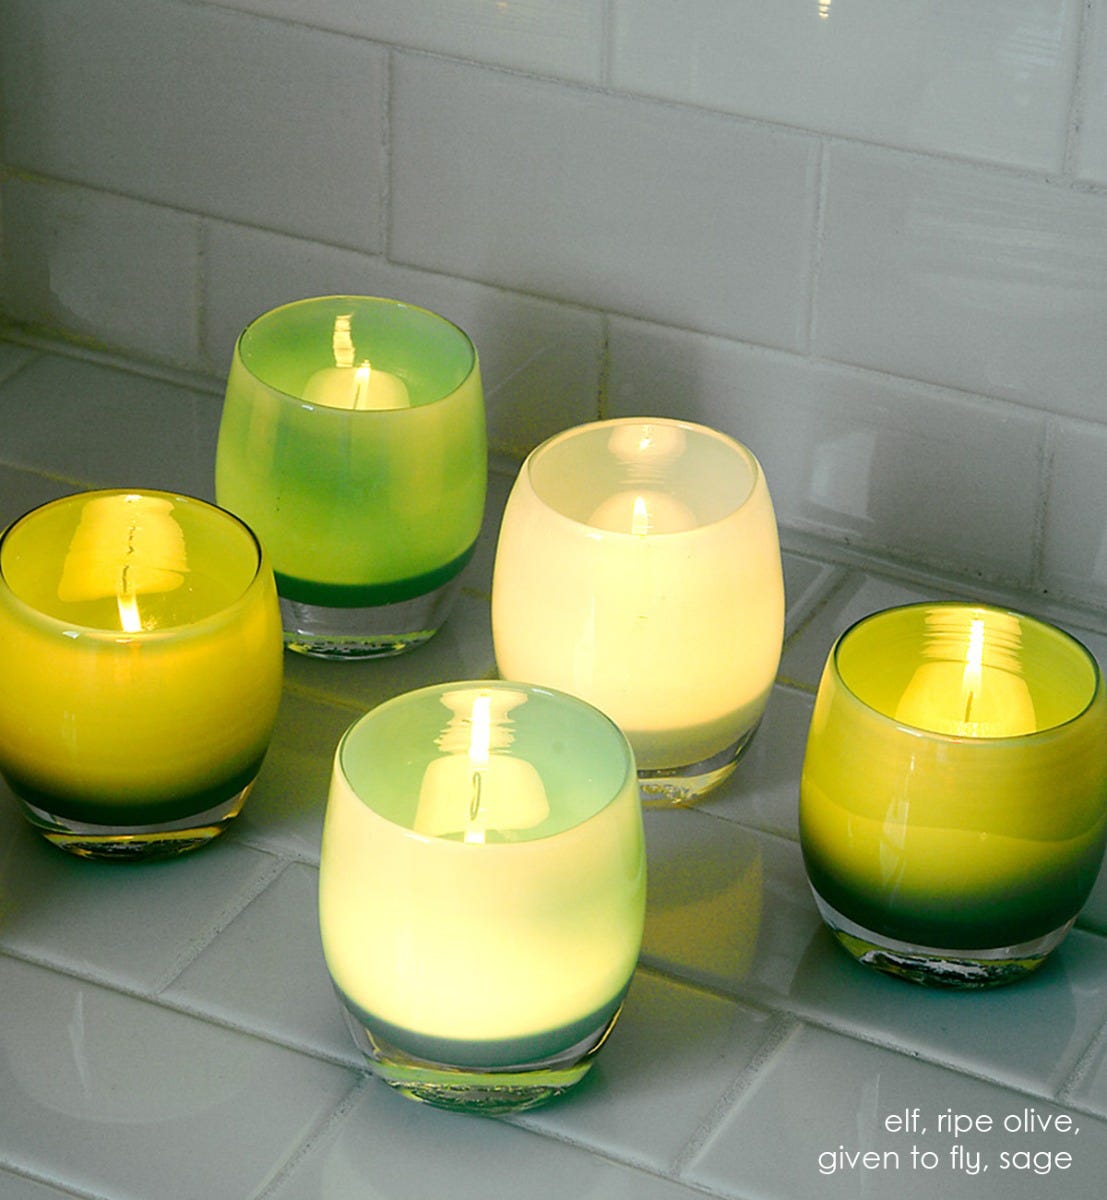 elf opaque light green hand-blown glass votive candle holder. Paired with ripe olive, given to fly, and sage.